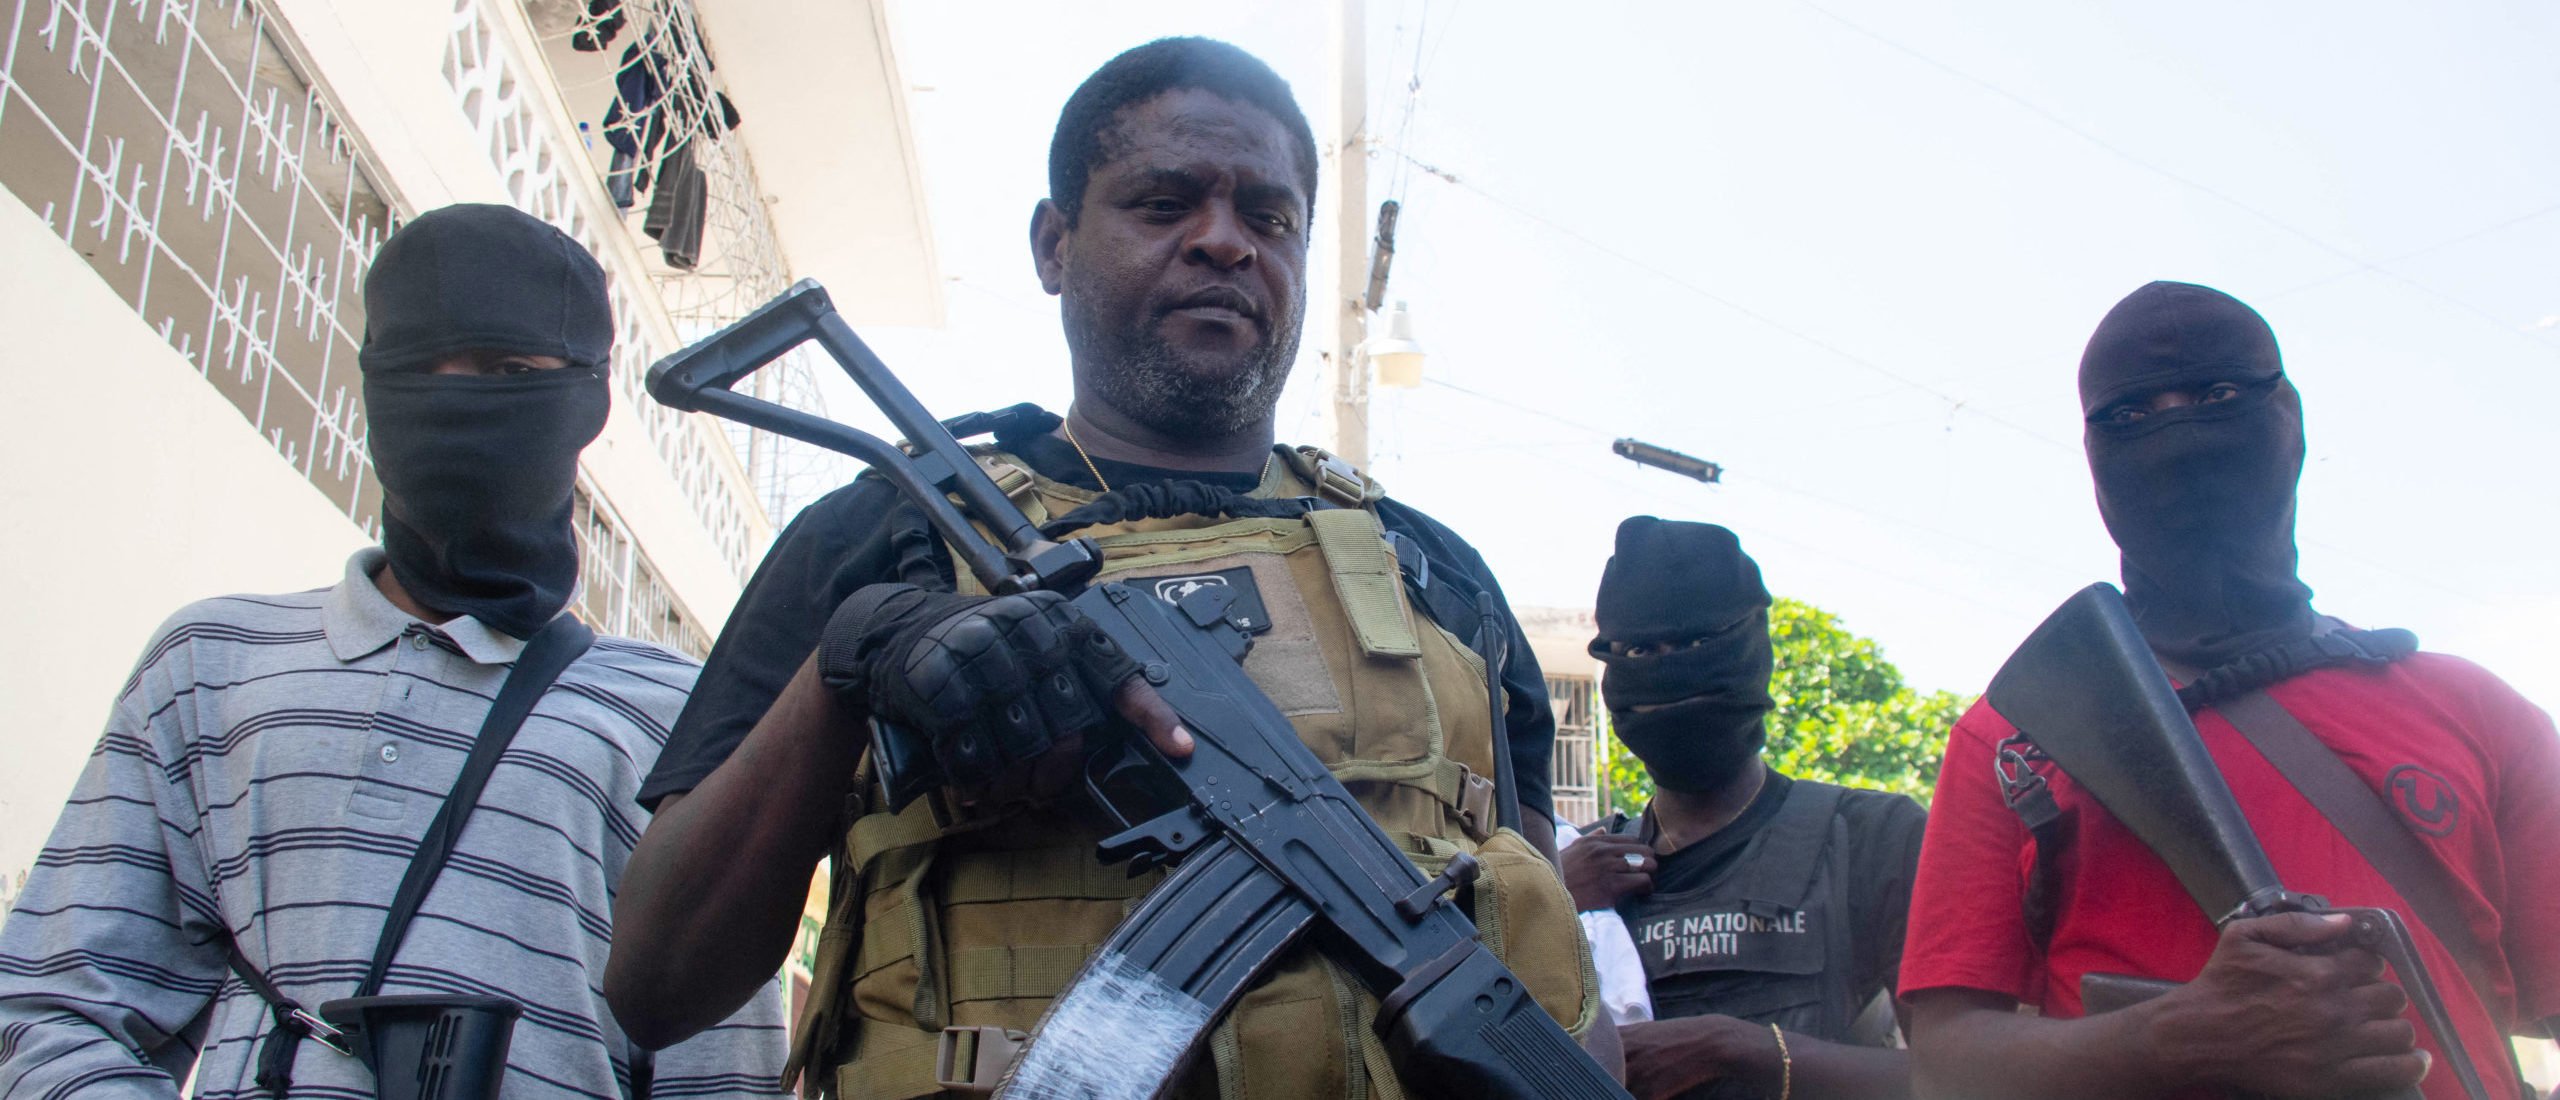 US Sends Anti-Terrorism Troops To Haiti As Nation Spirals Into Chaos Under Gang Rule